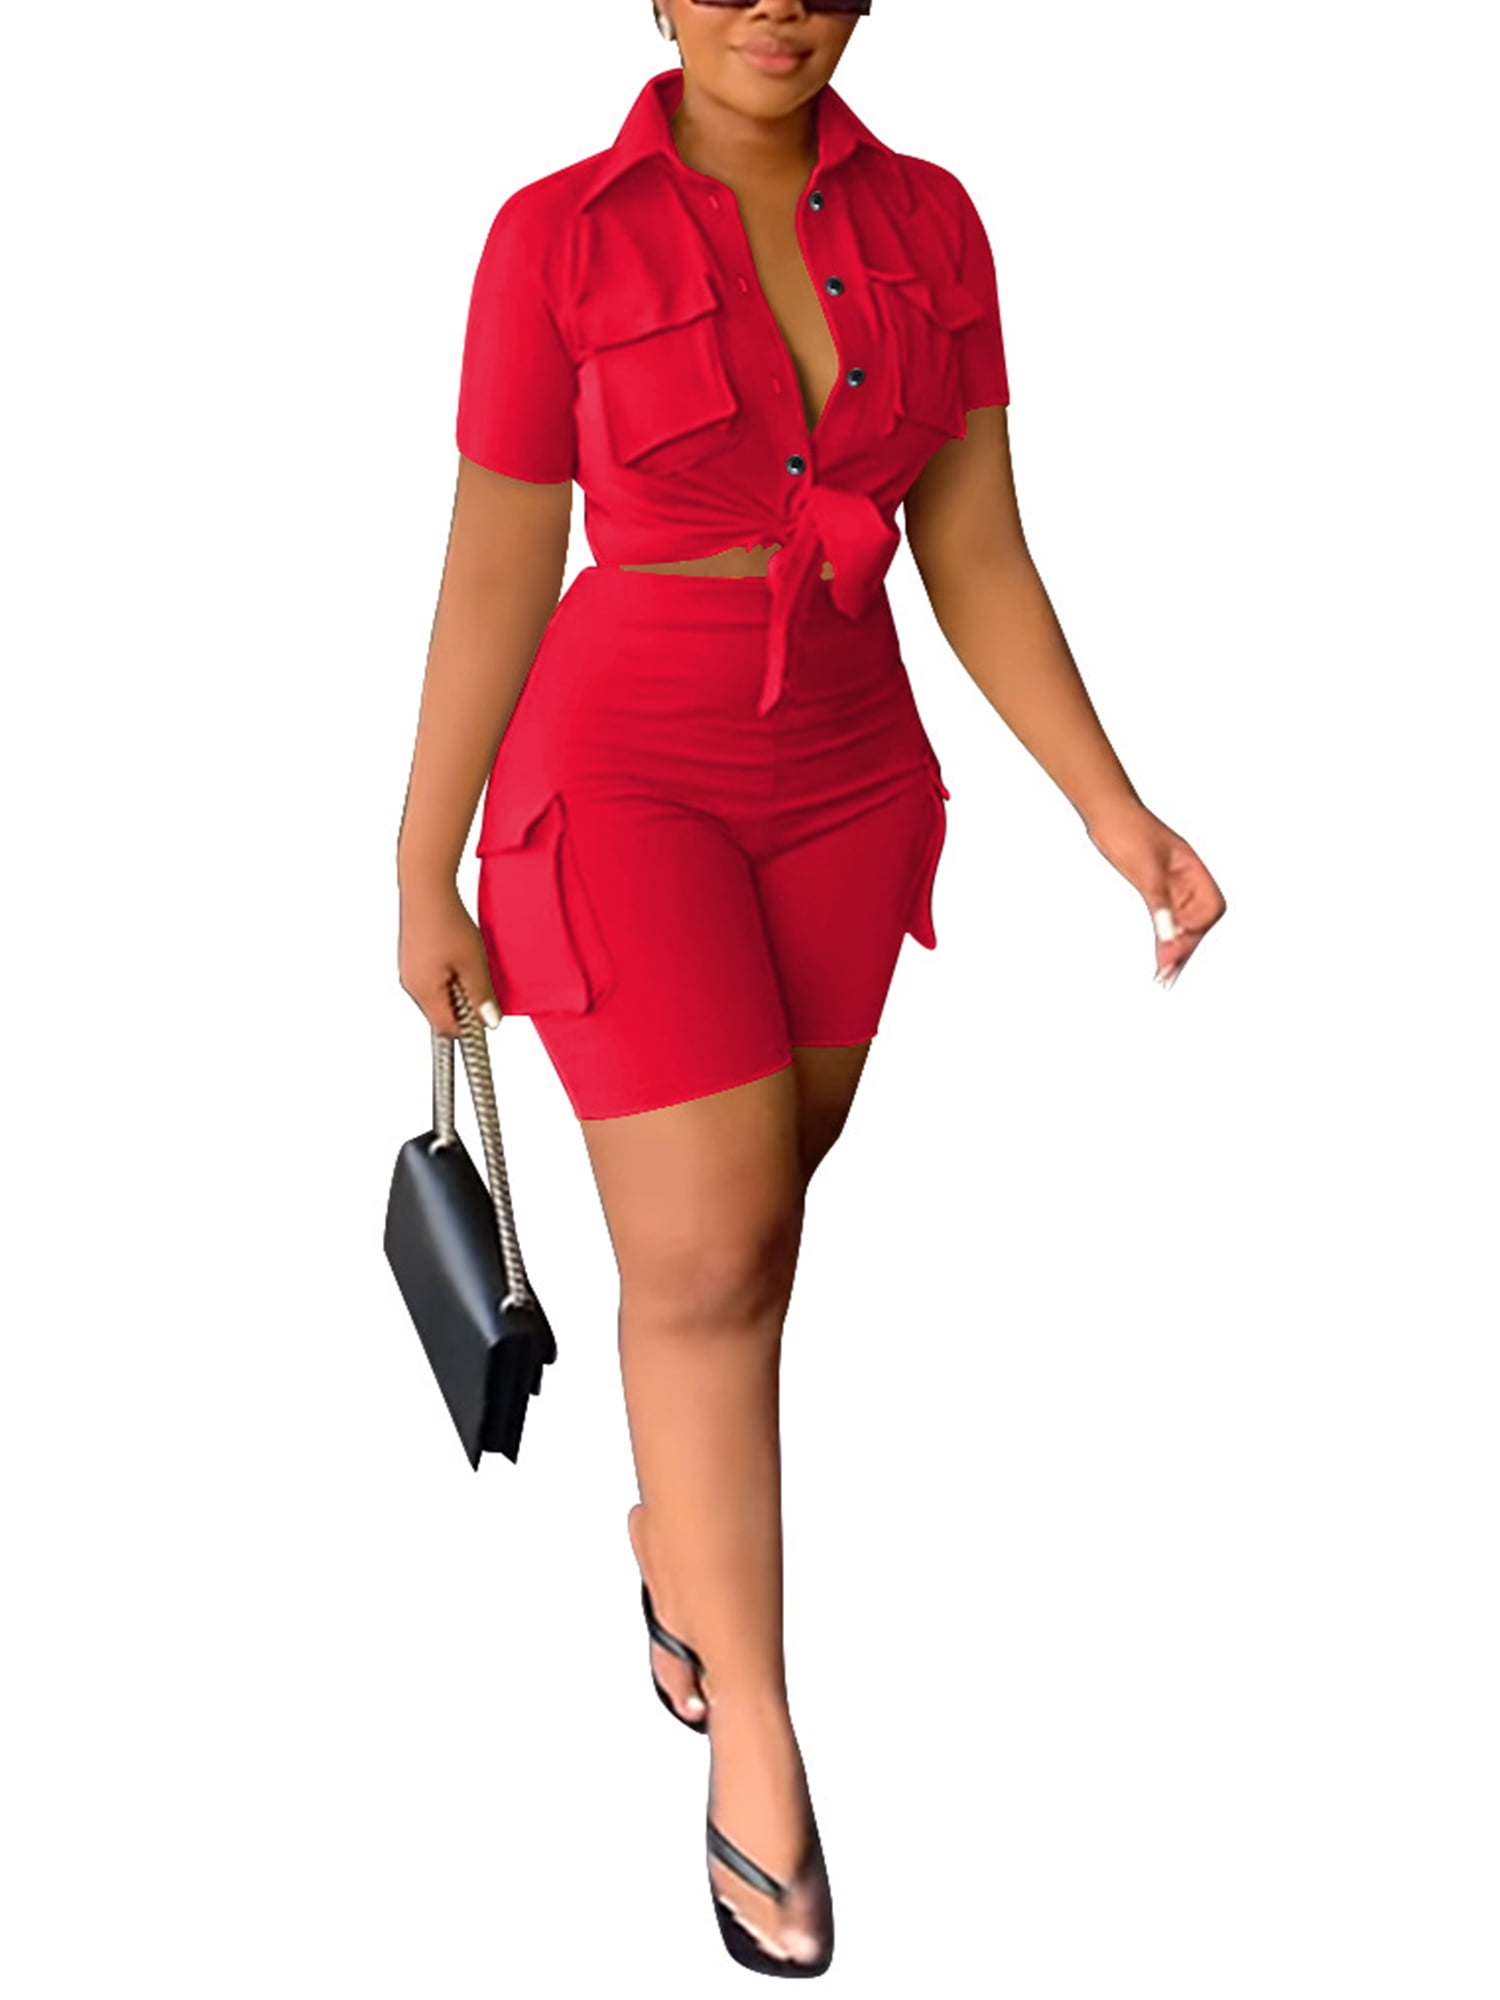  Remelon Womens 2 Piece Outfits Sexy Suits Gradient Shirt Tops  Bodycon Pants Set Jumpsuit Clubwear : Clothing, Shoes & Jewelry